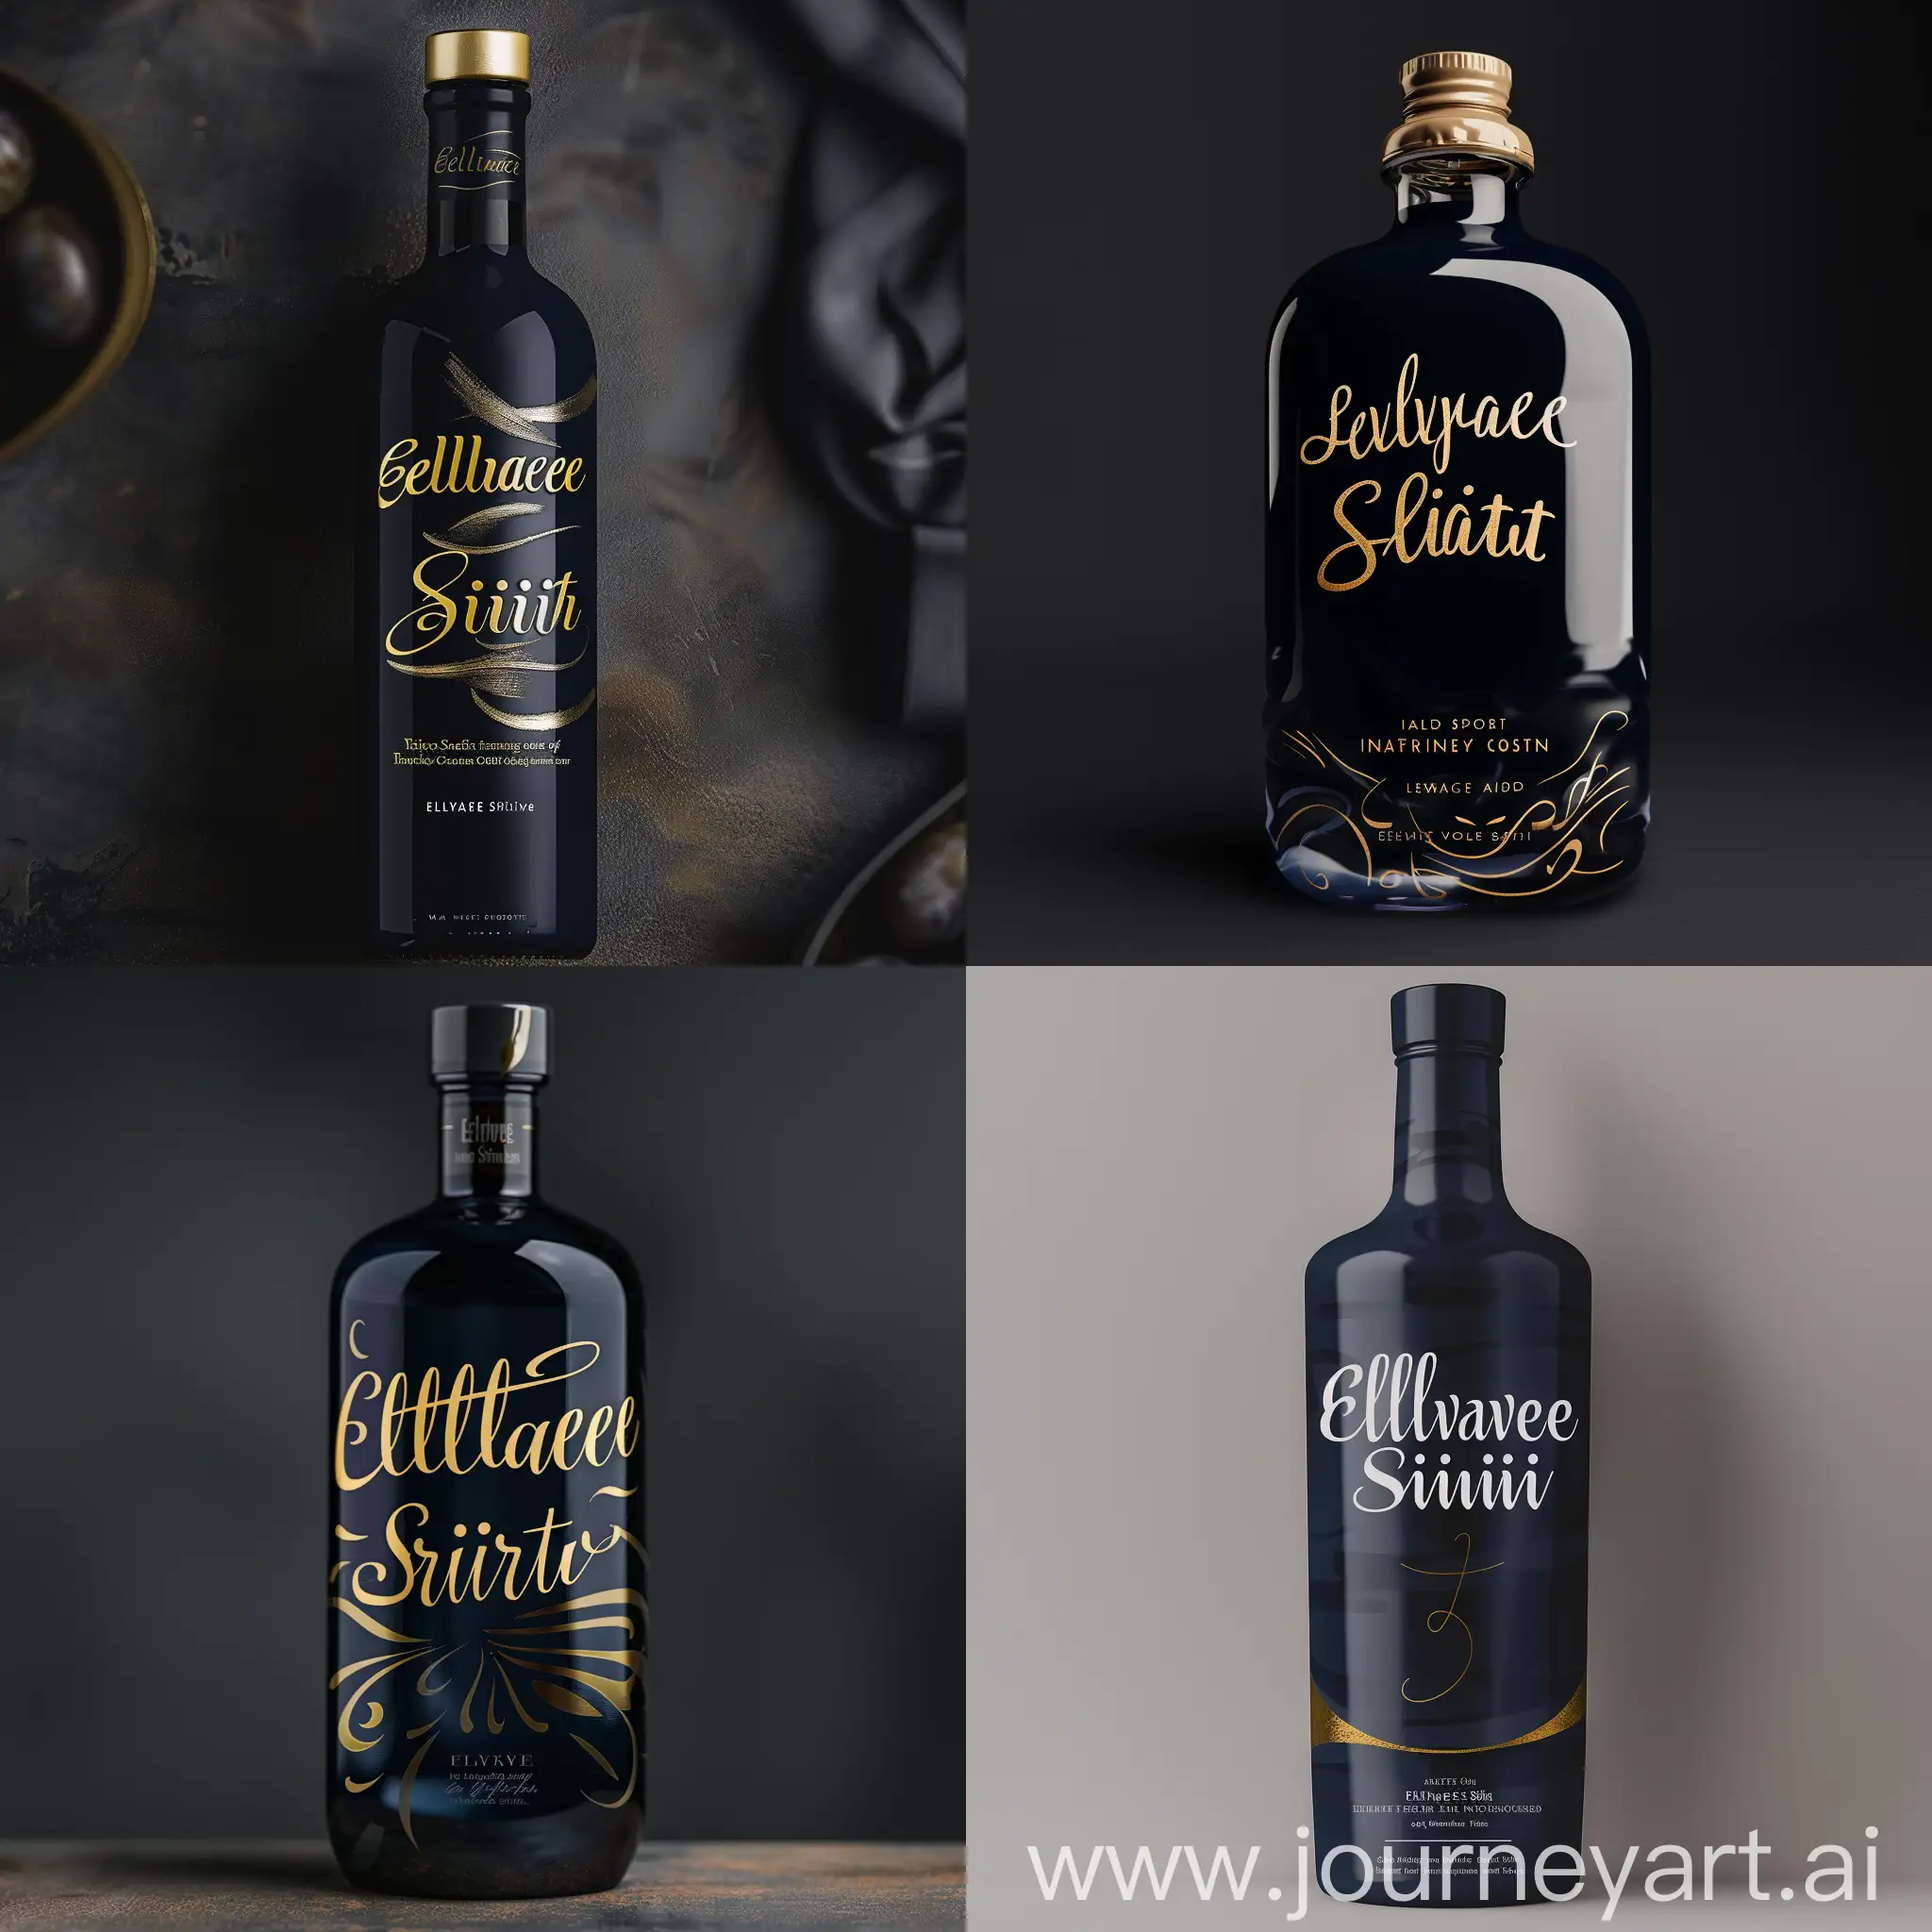 make a picture of a bottle with liquid with next package design: The packaging features a sleek and modern design, with a sophisticated color scheme of deep navy blue and gold accents. The name "Elevate Spirit" is prominently displayed in elegant cursive writing, exuding class and refinement. The bottle has a clean, minimalist look to convey a sense of premium quality and a focus on the essence of the beverage. The overall design aims to appeal to those seeking an upscale and indulgent experience without alcohol.